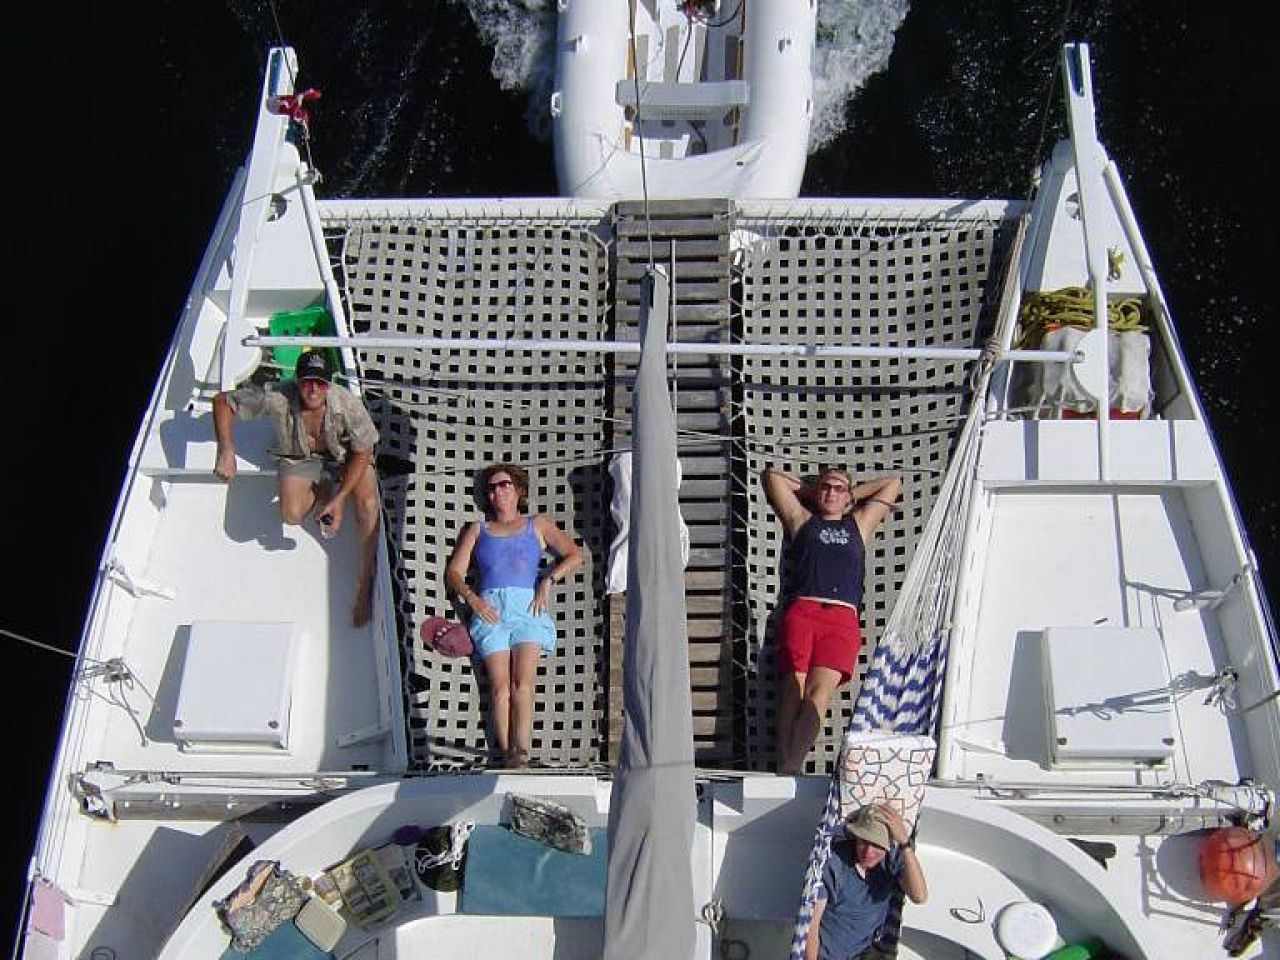 Bird's eye view of a catamaran deck, people lying on the bow trampoline